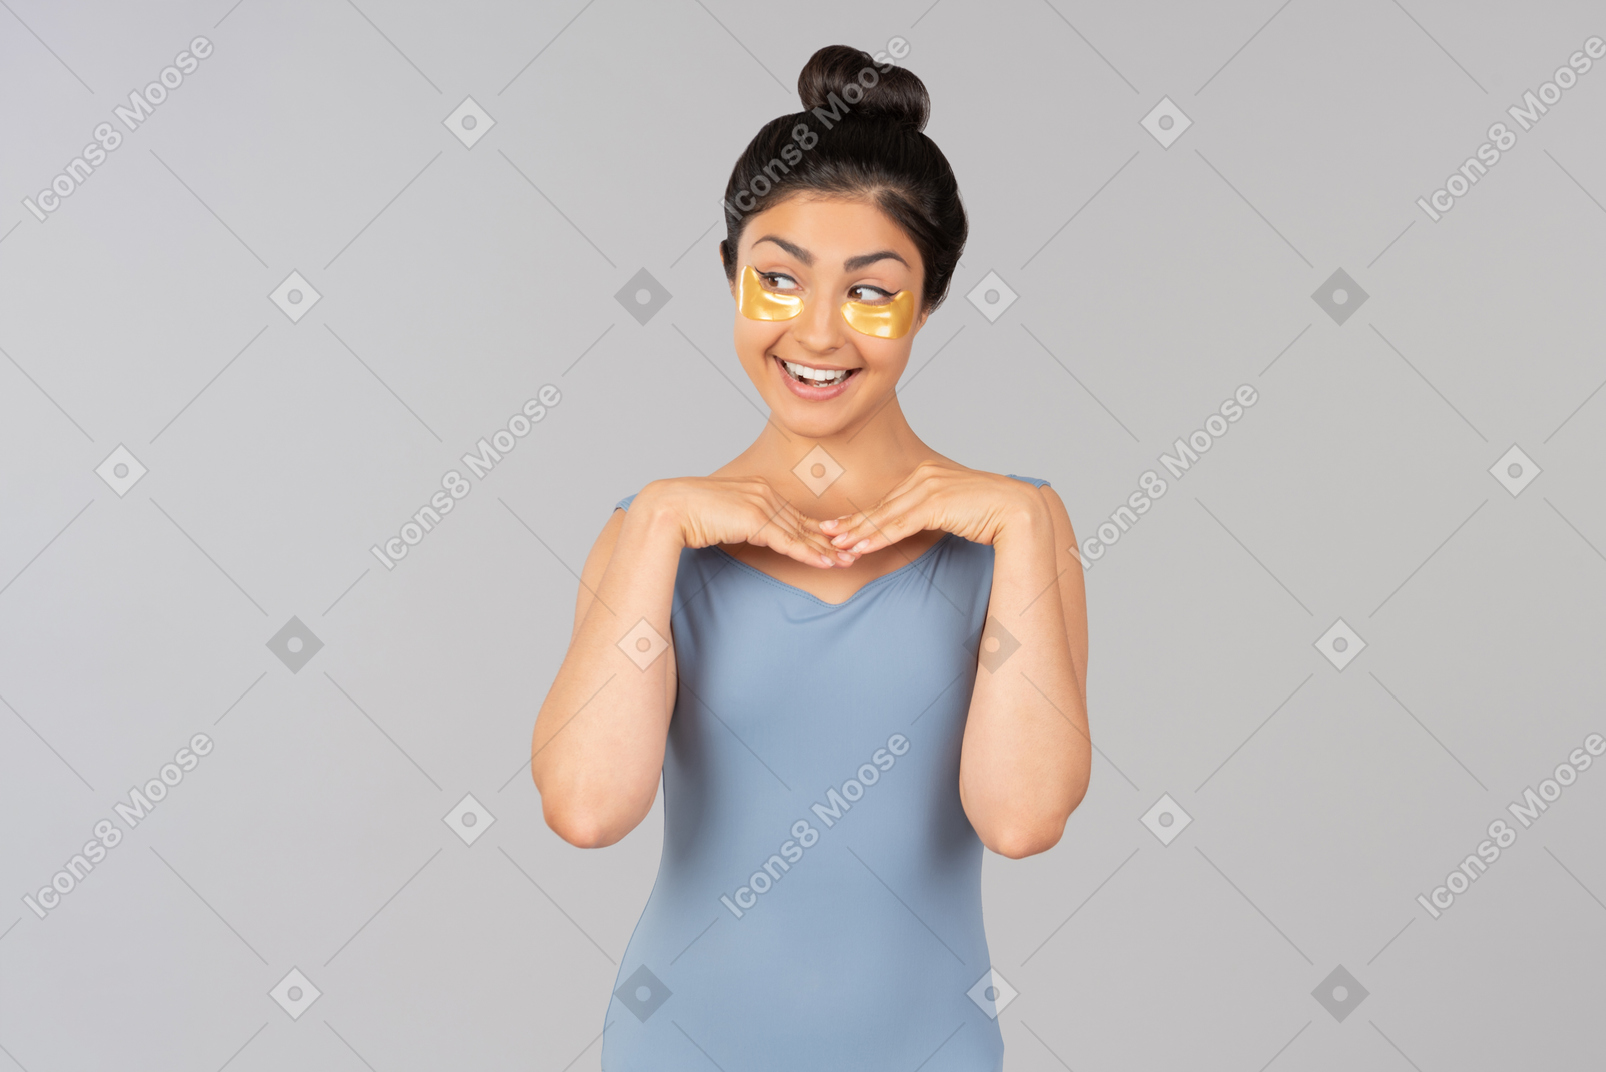 Laughing young indian woman with eye patches on touching her face